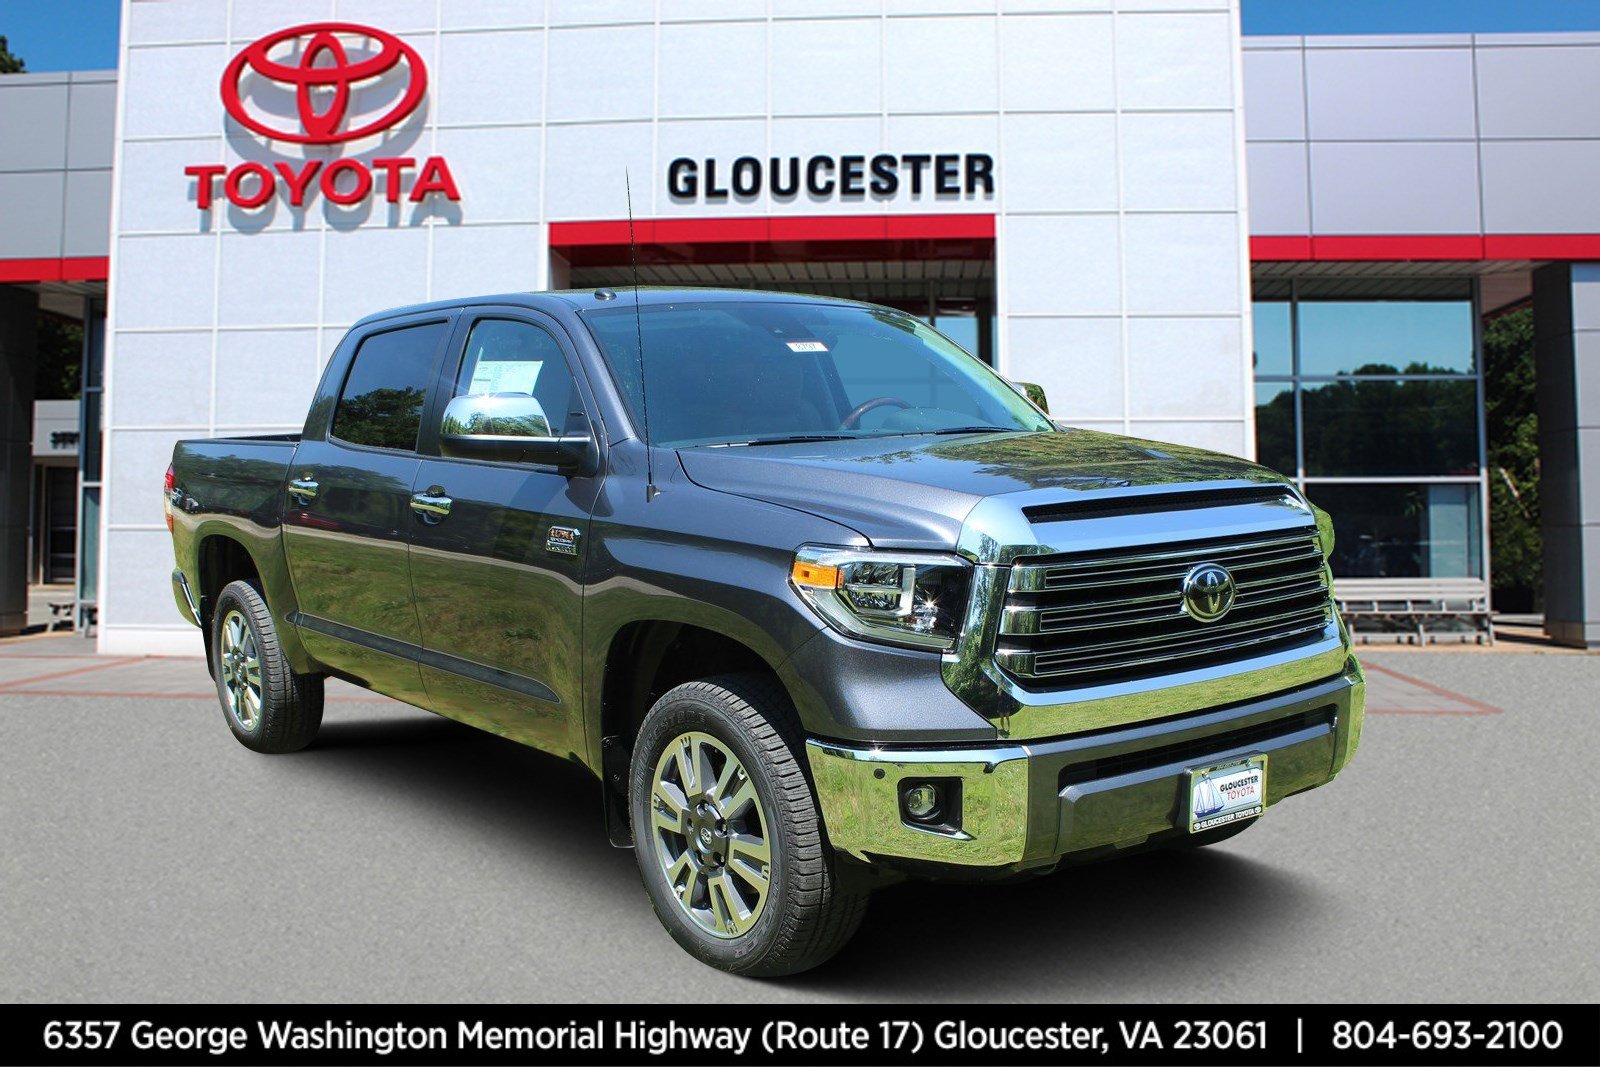 New 2019 Toyota Tundra 4WD 1794 Edition Crew Cab Pickup in Gloucester